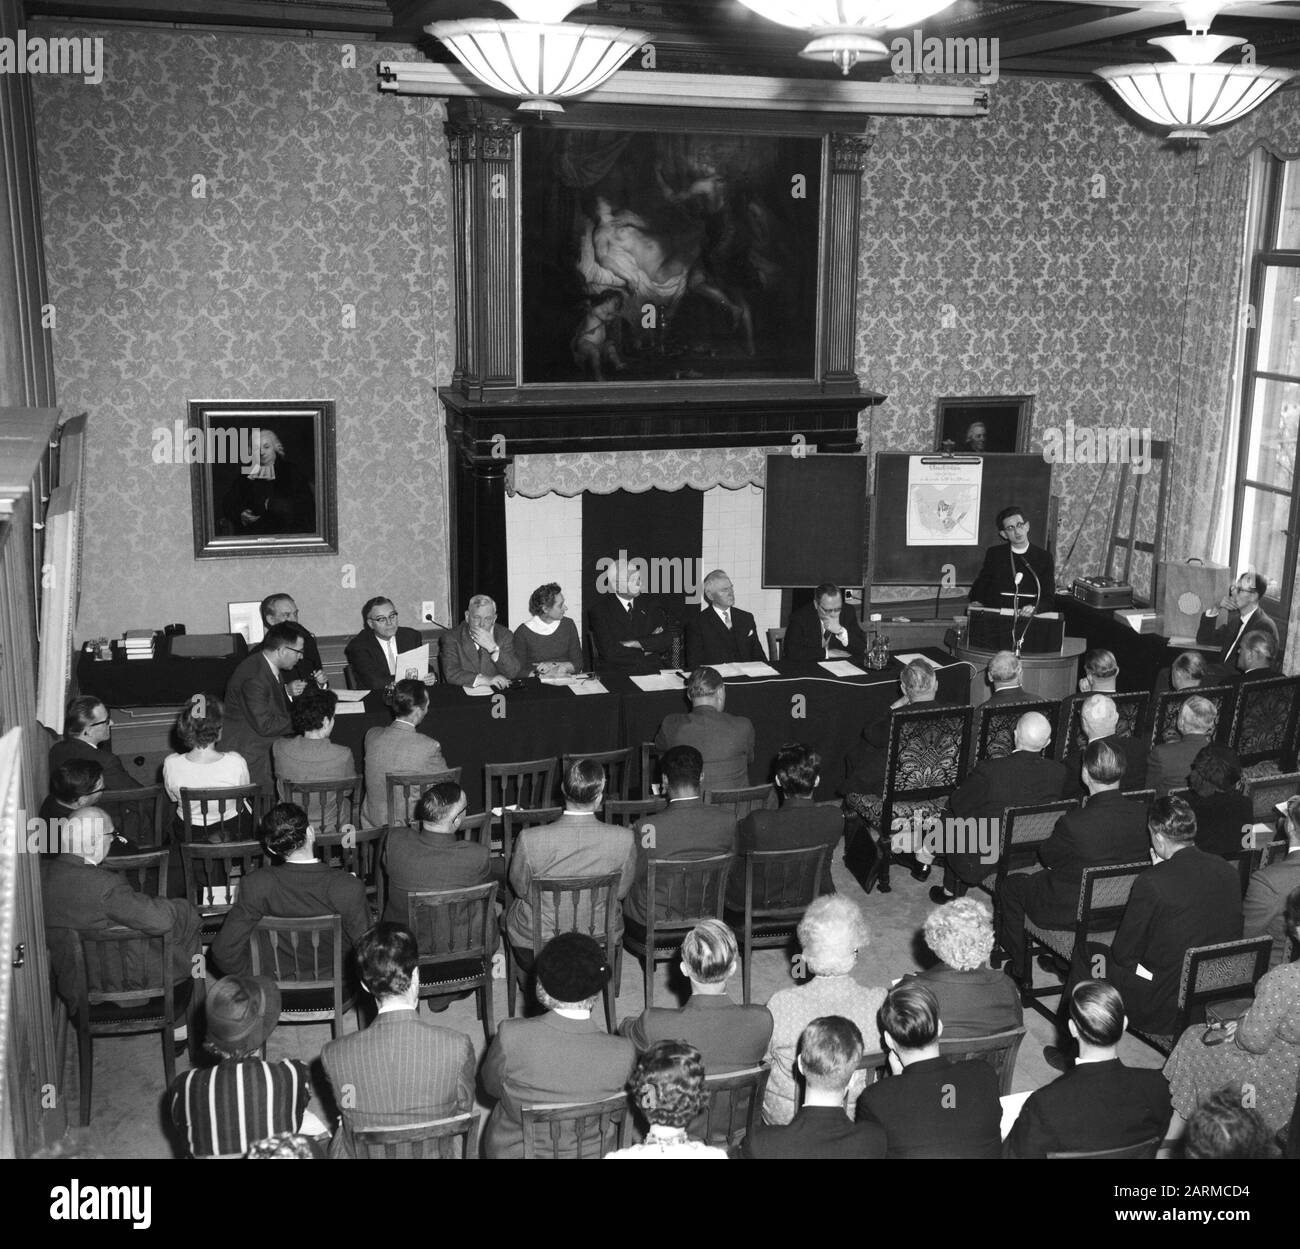 Symposium about Amsterdam and Rotterdam dialects at Amsterdam Date: 2 January 1960 Location: Amsterdam, Noord-Holland Keywords: Dialects, symposia Stock Photo